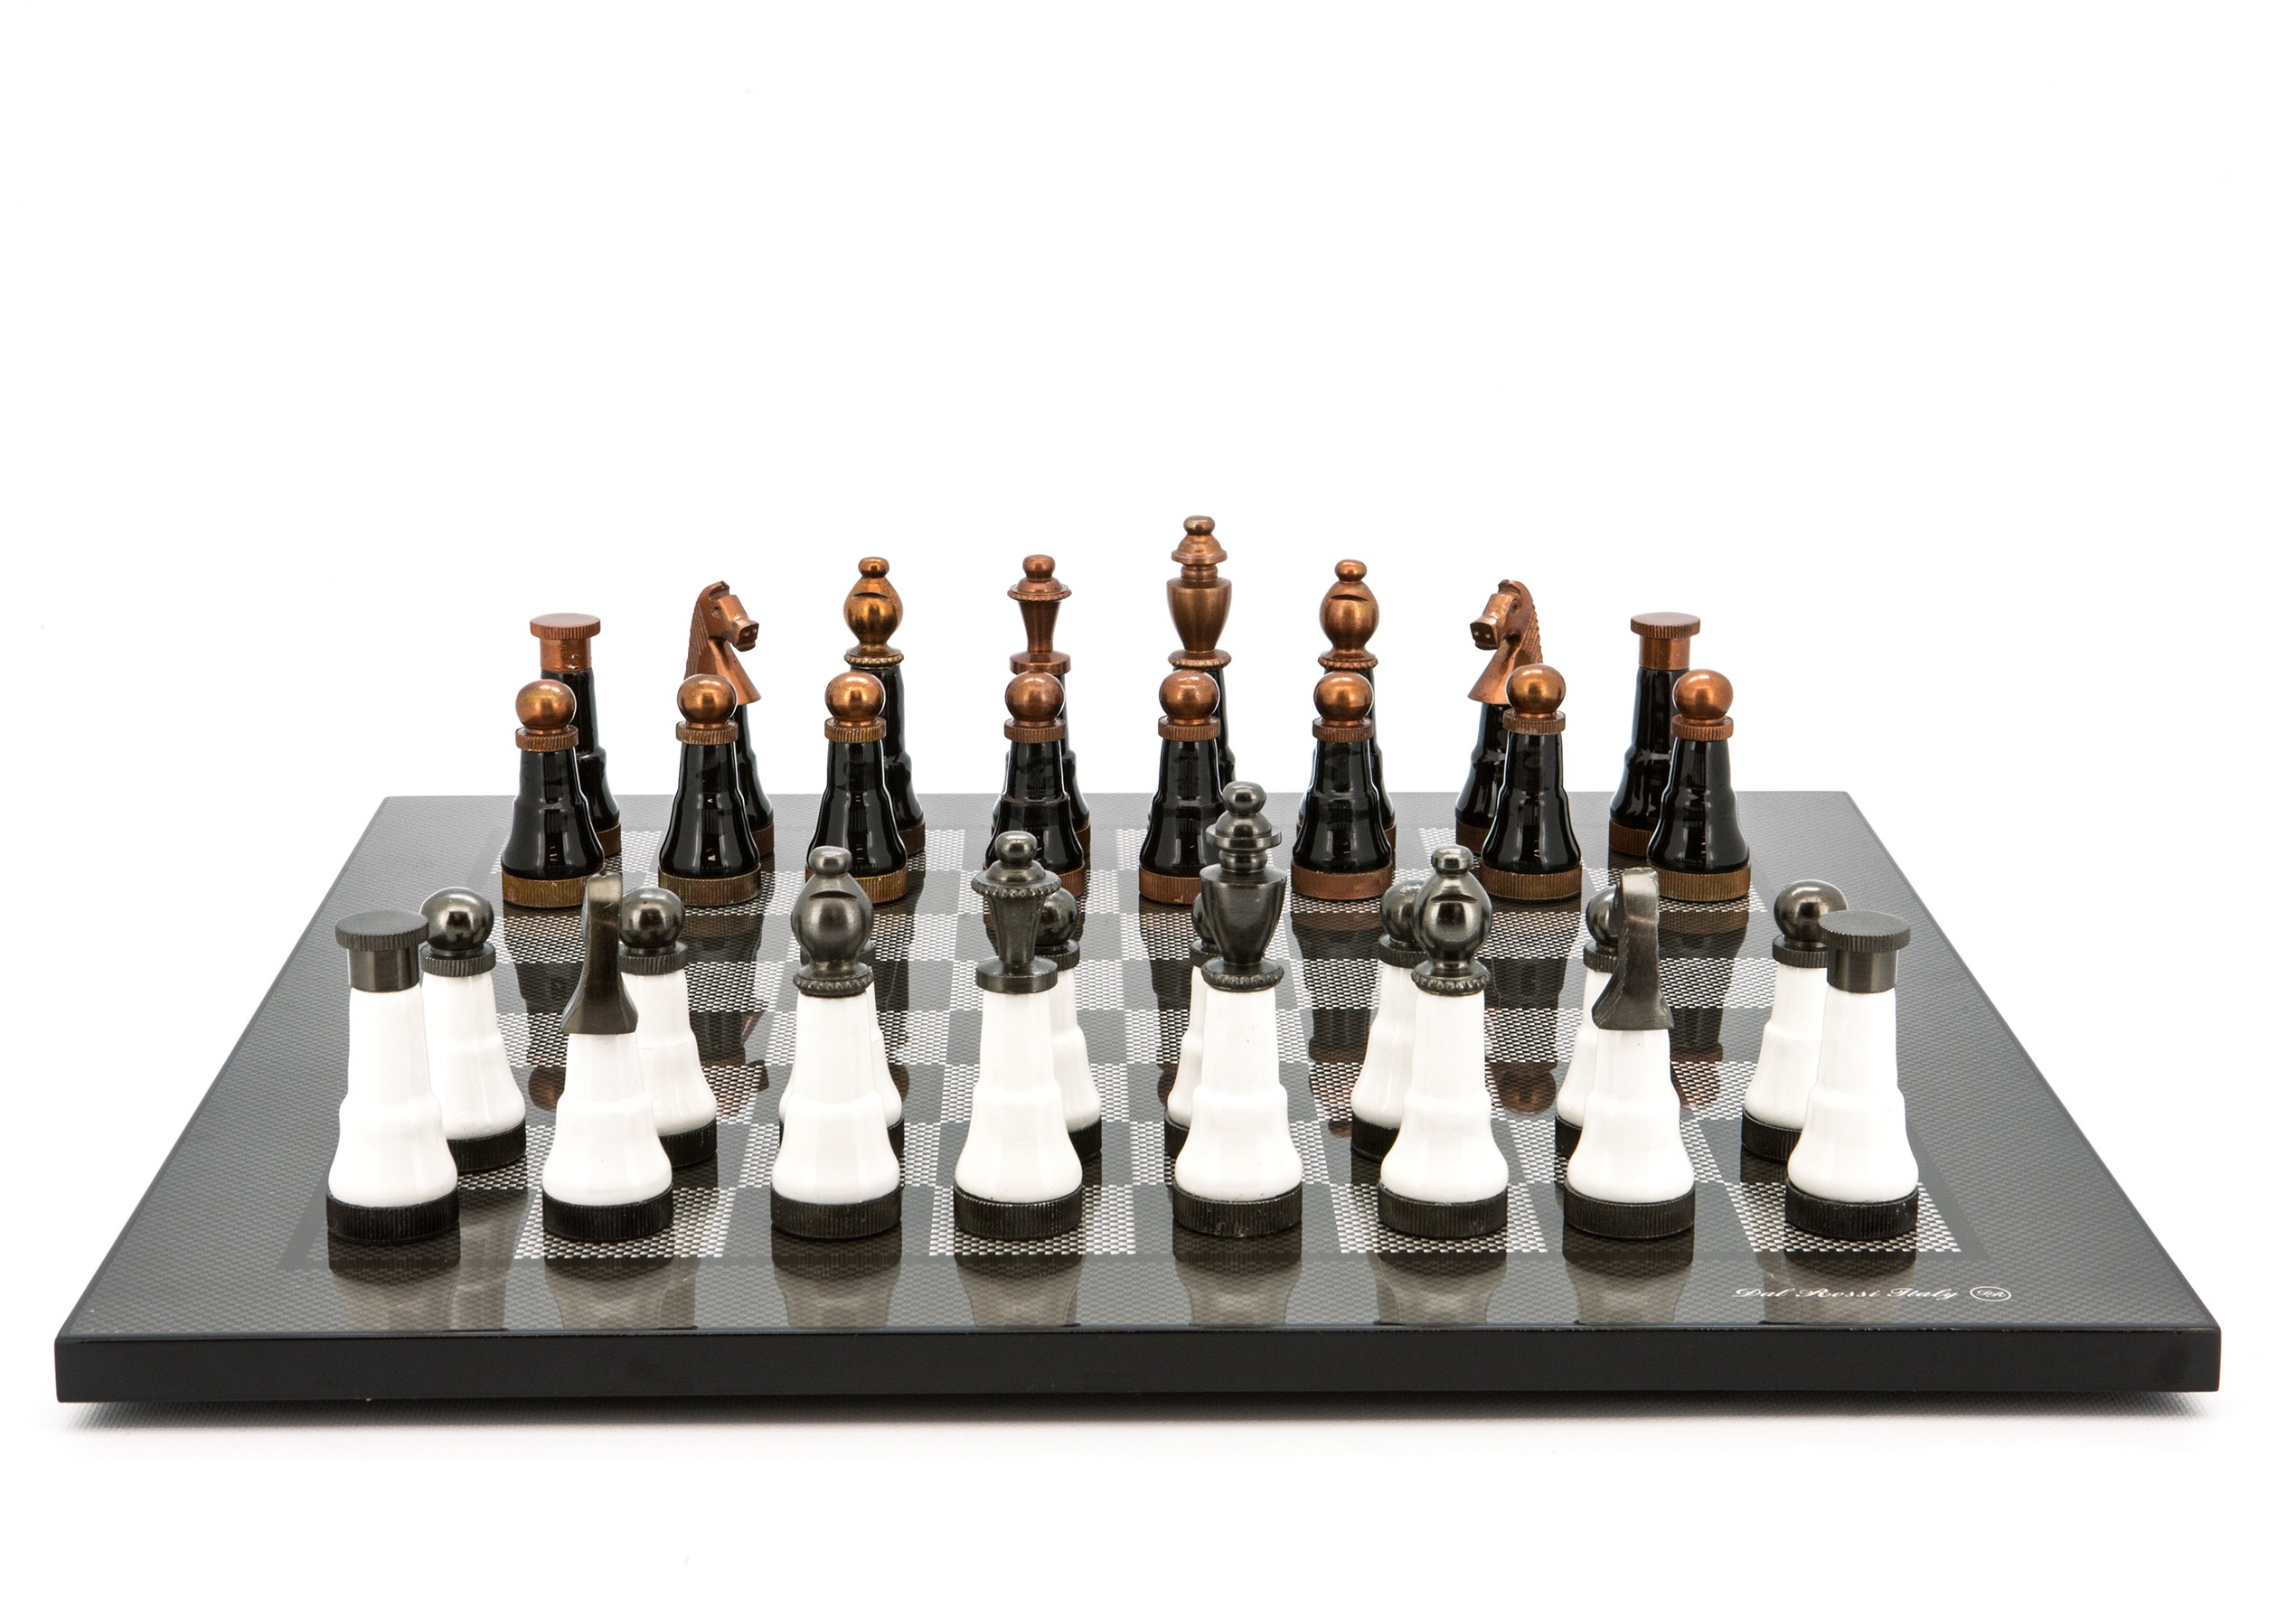 Dal Rossi Italy Chess Set Flat  Carbon Fibre 50cm, With Black and White with Copper and Gun Metal Gray Tops and Bottoms Chess Pieces 110mm 